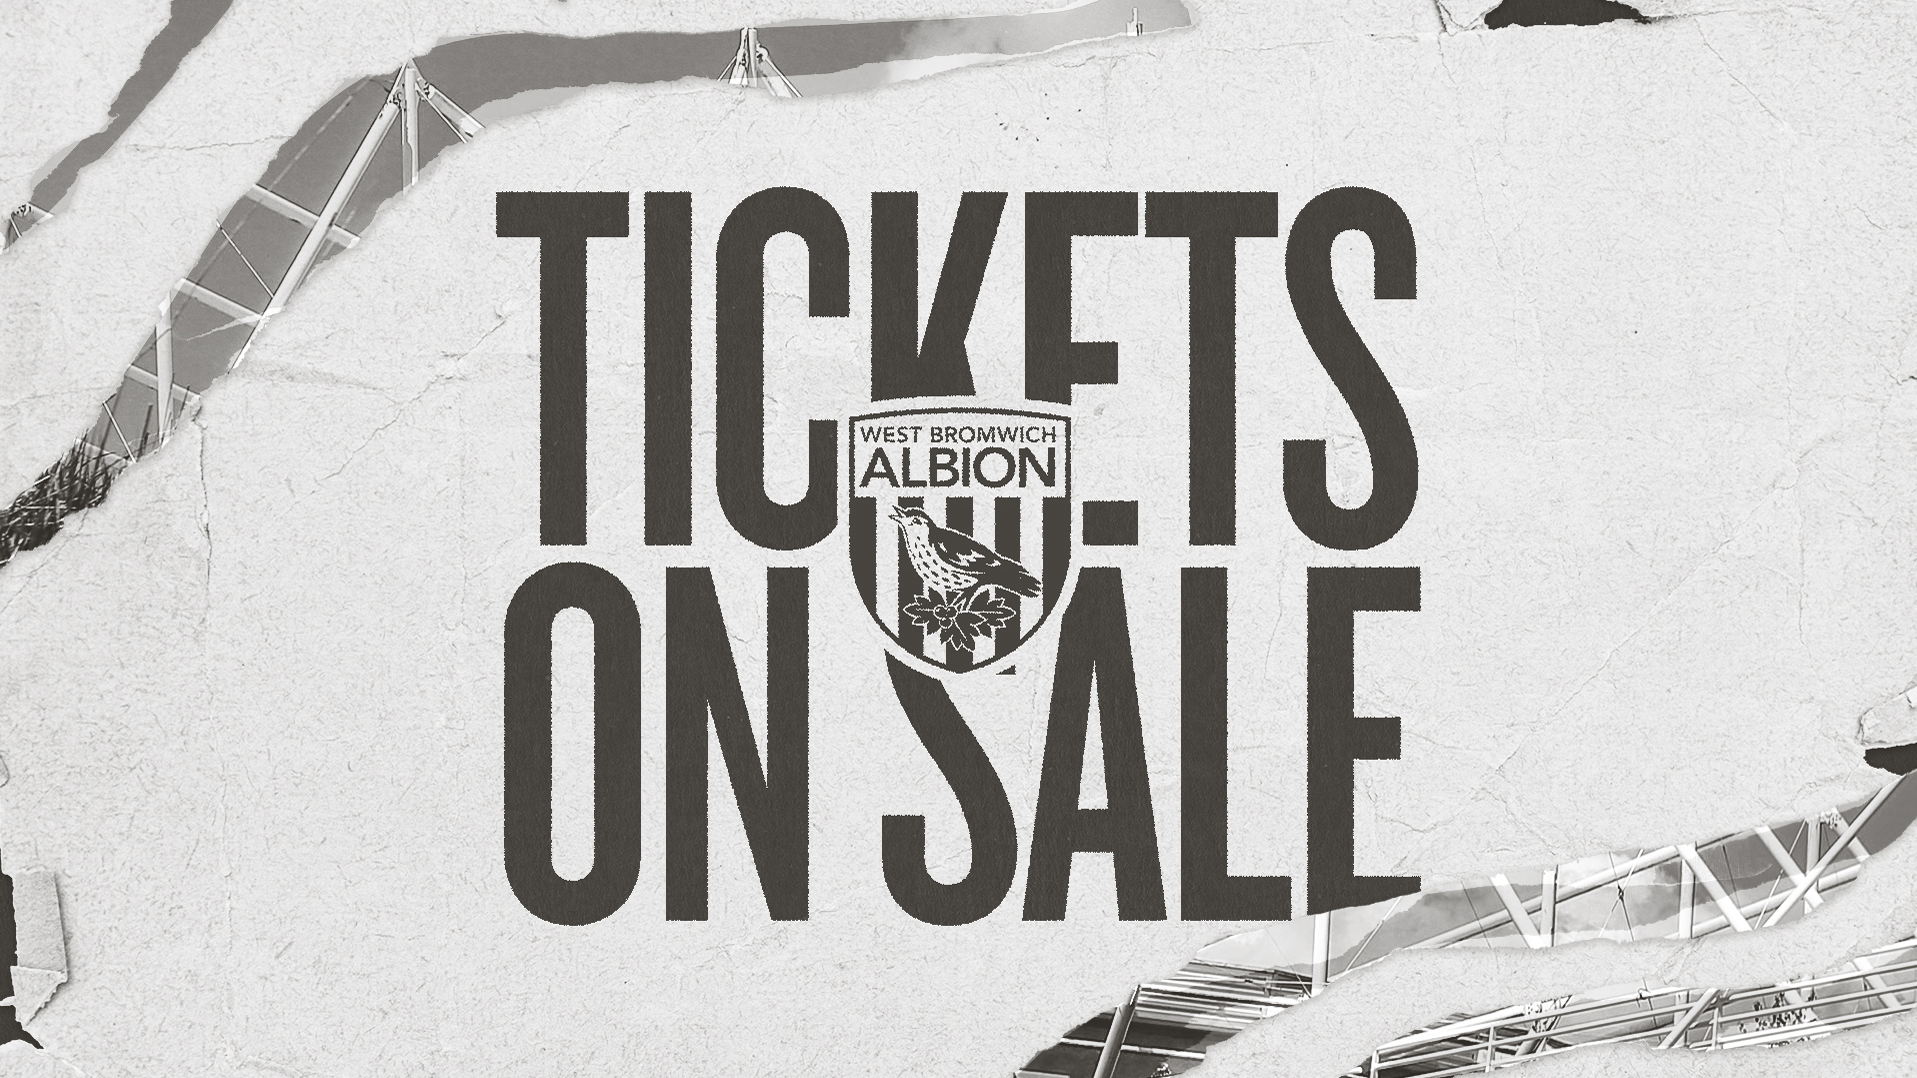 West Brom tickets on sale